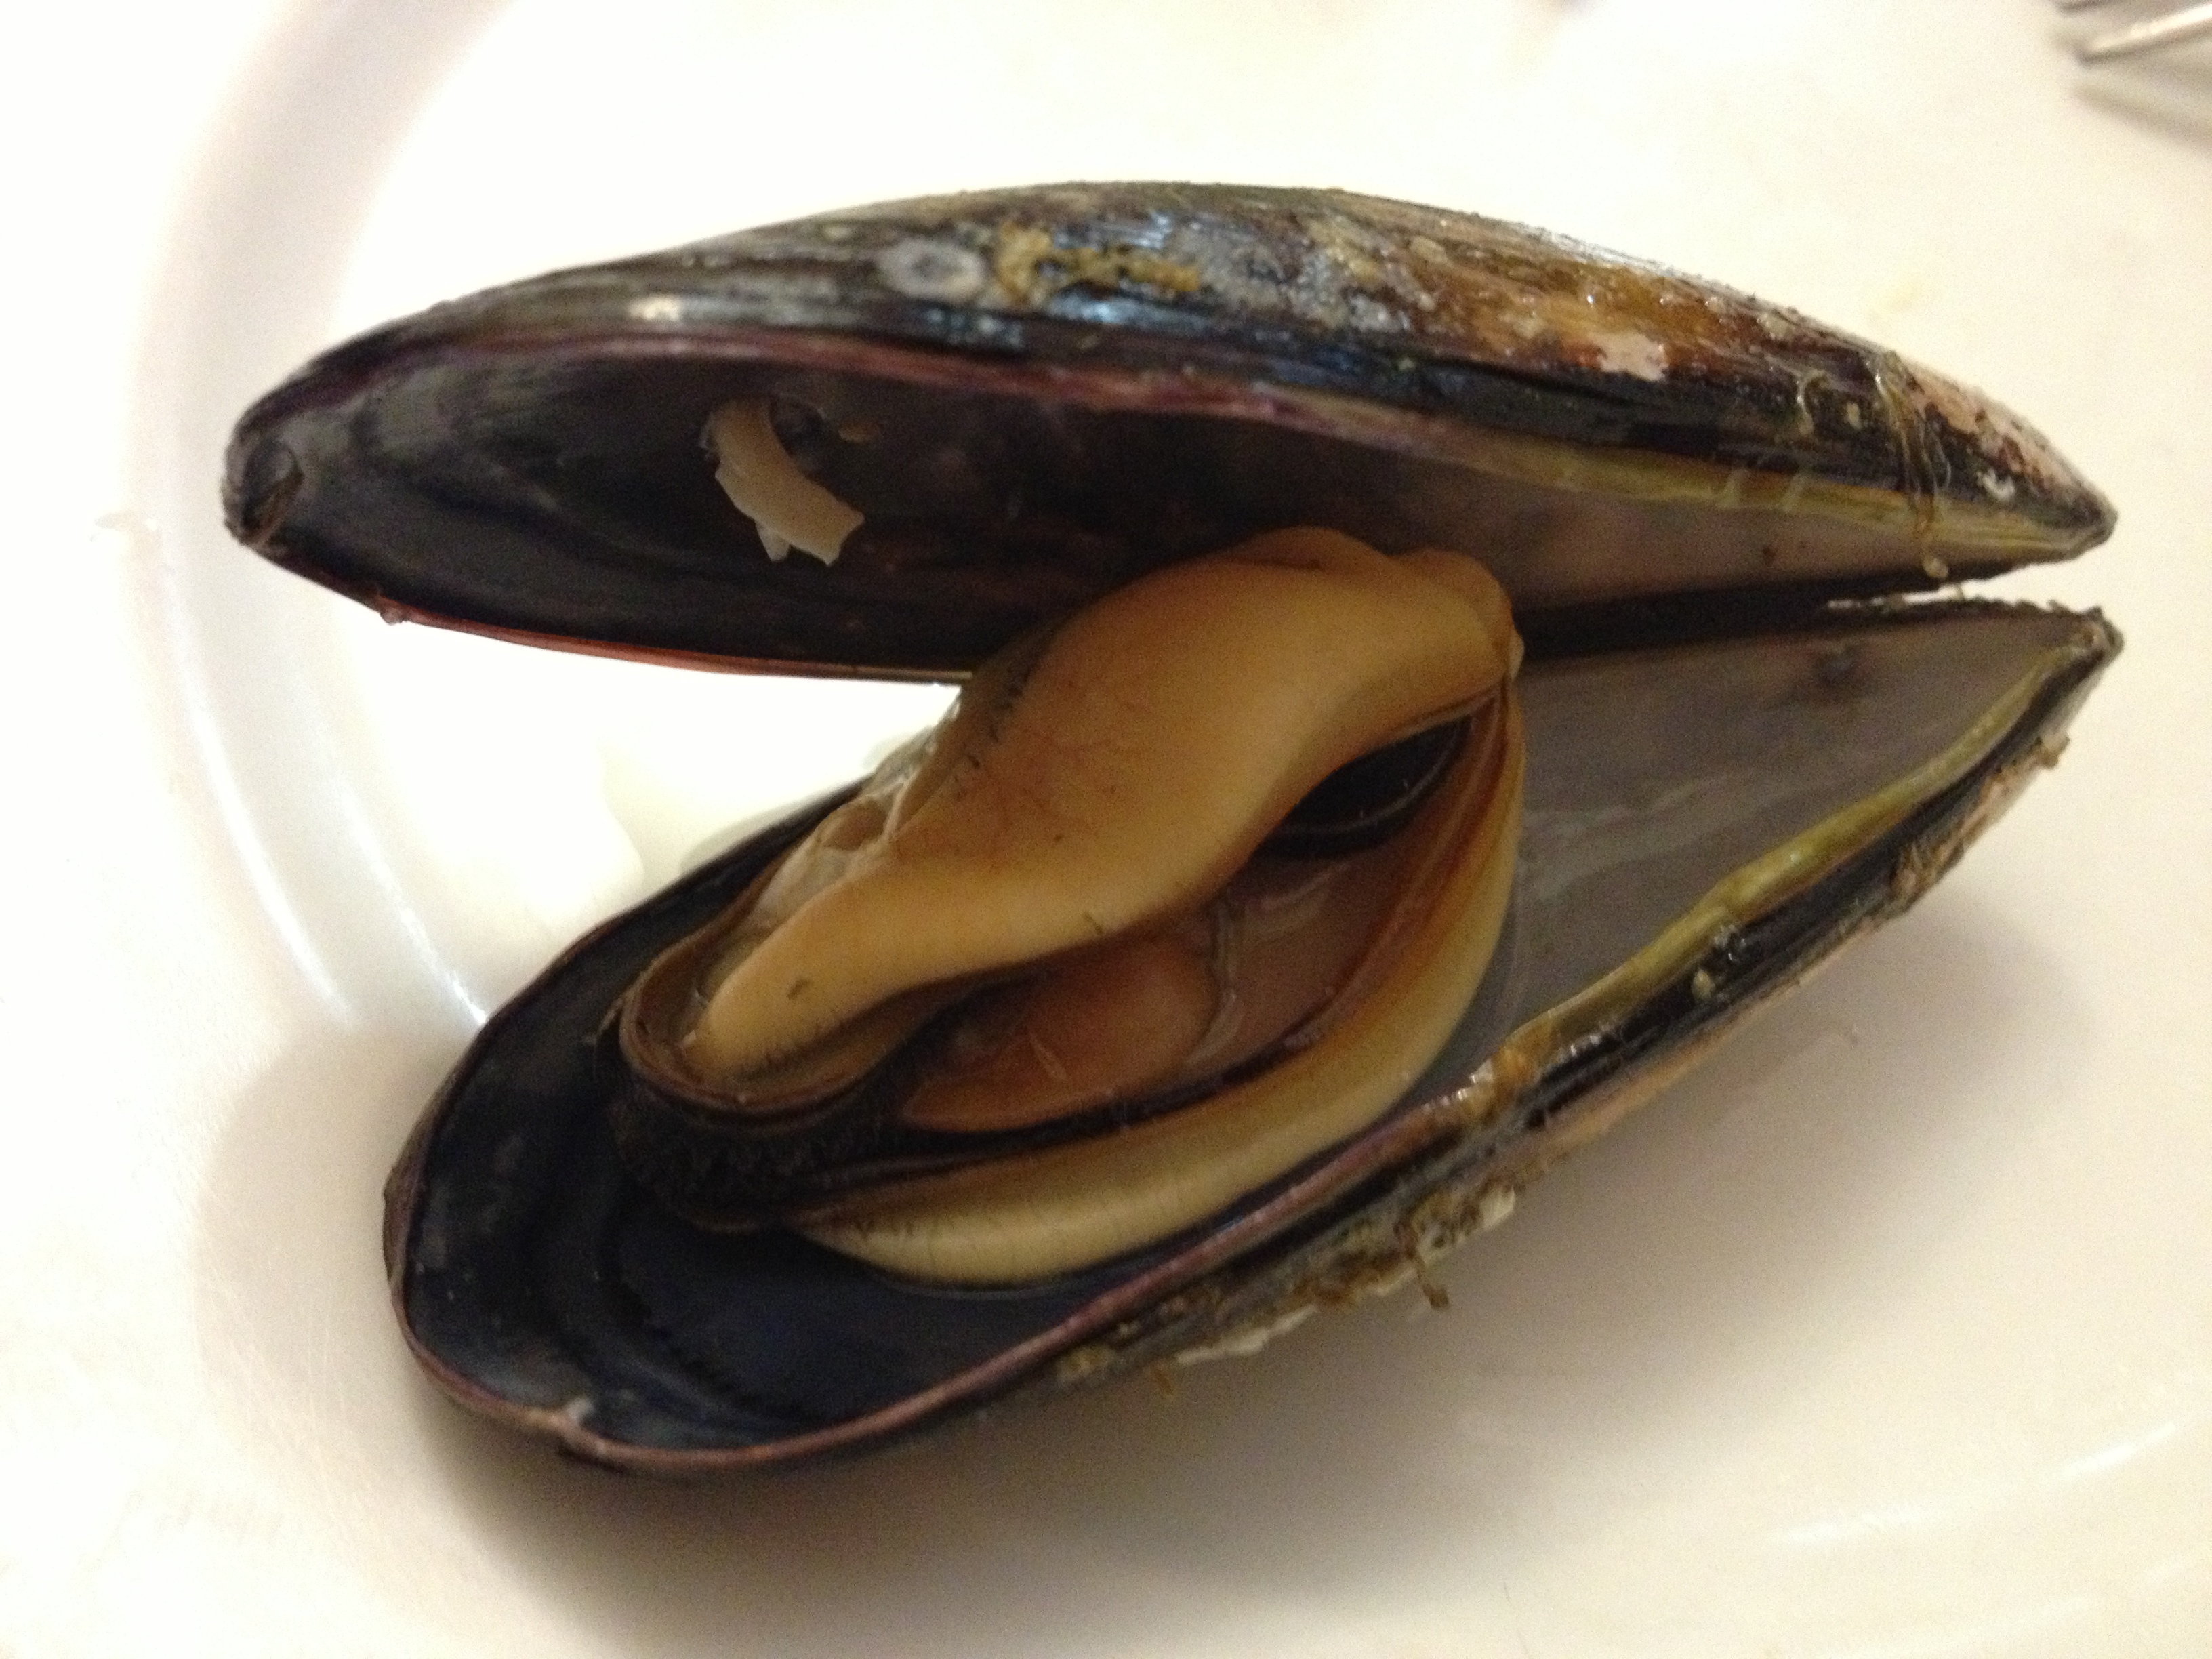 A giant mussel